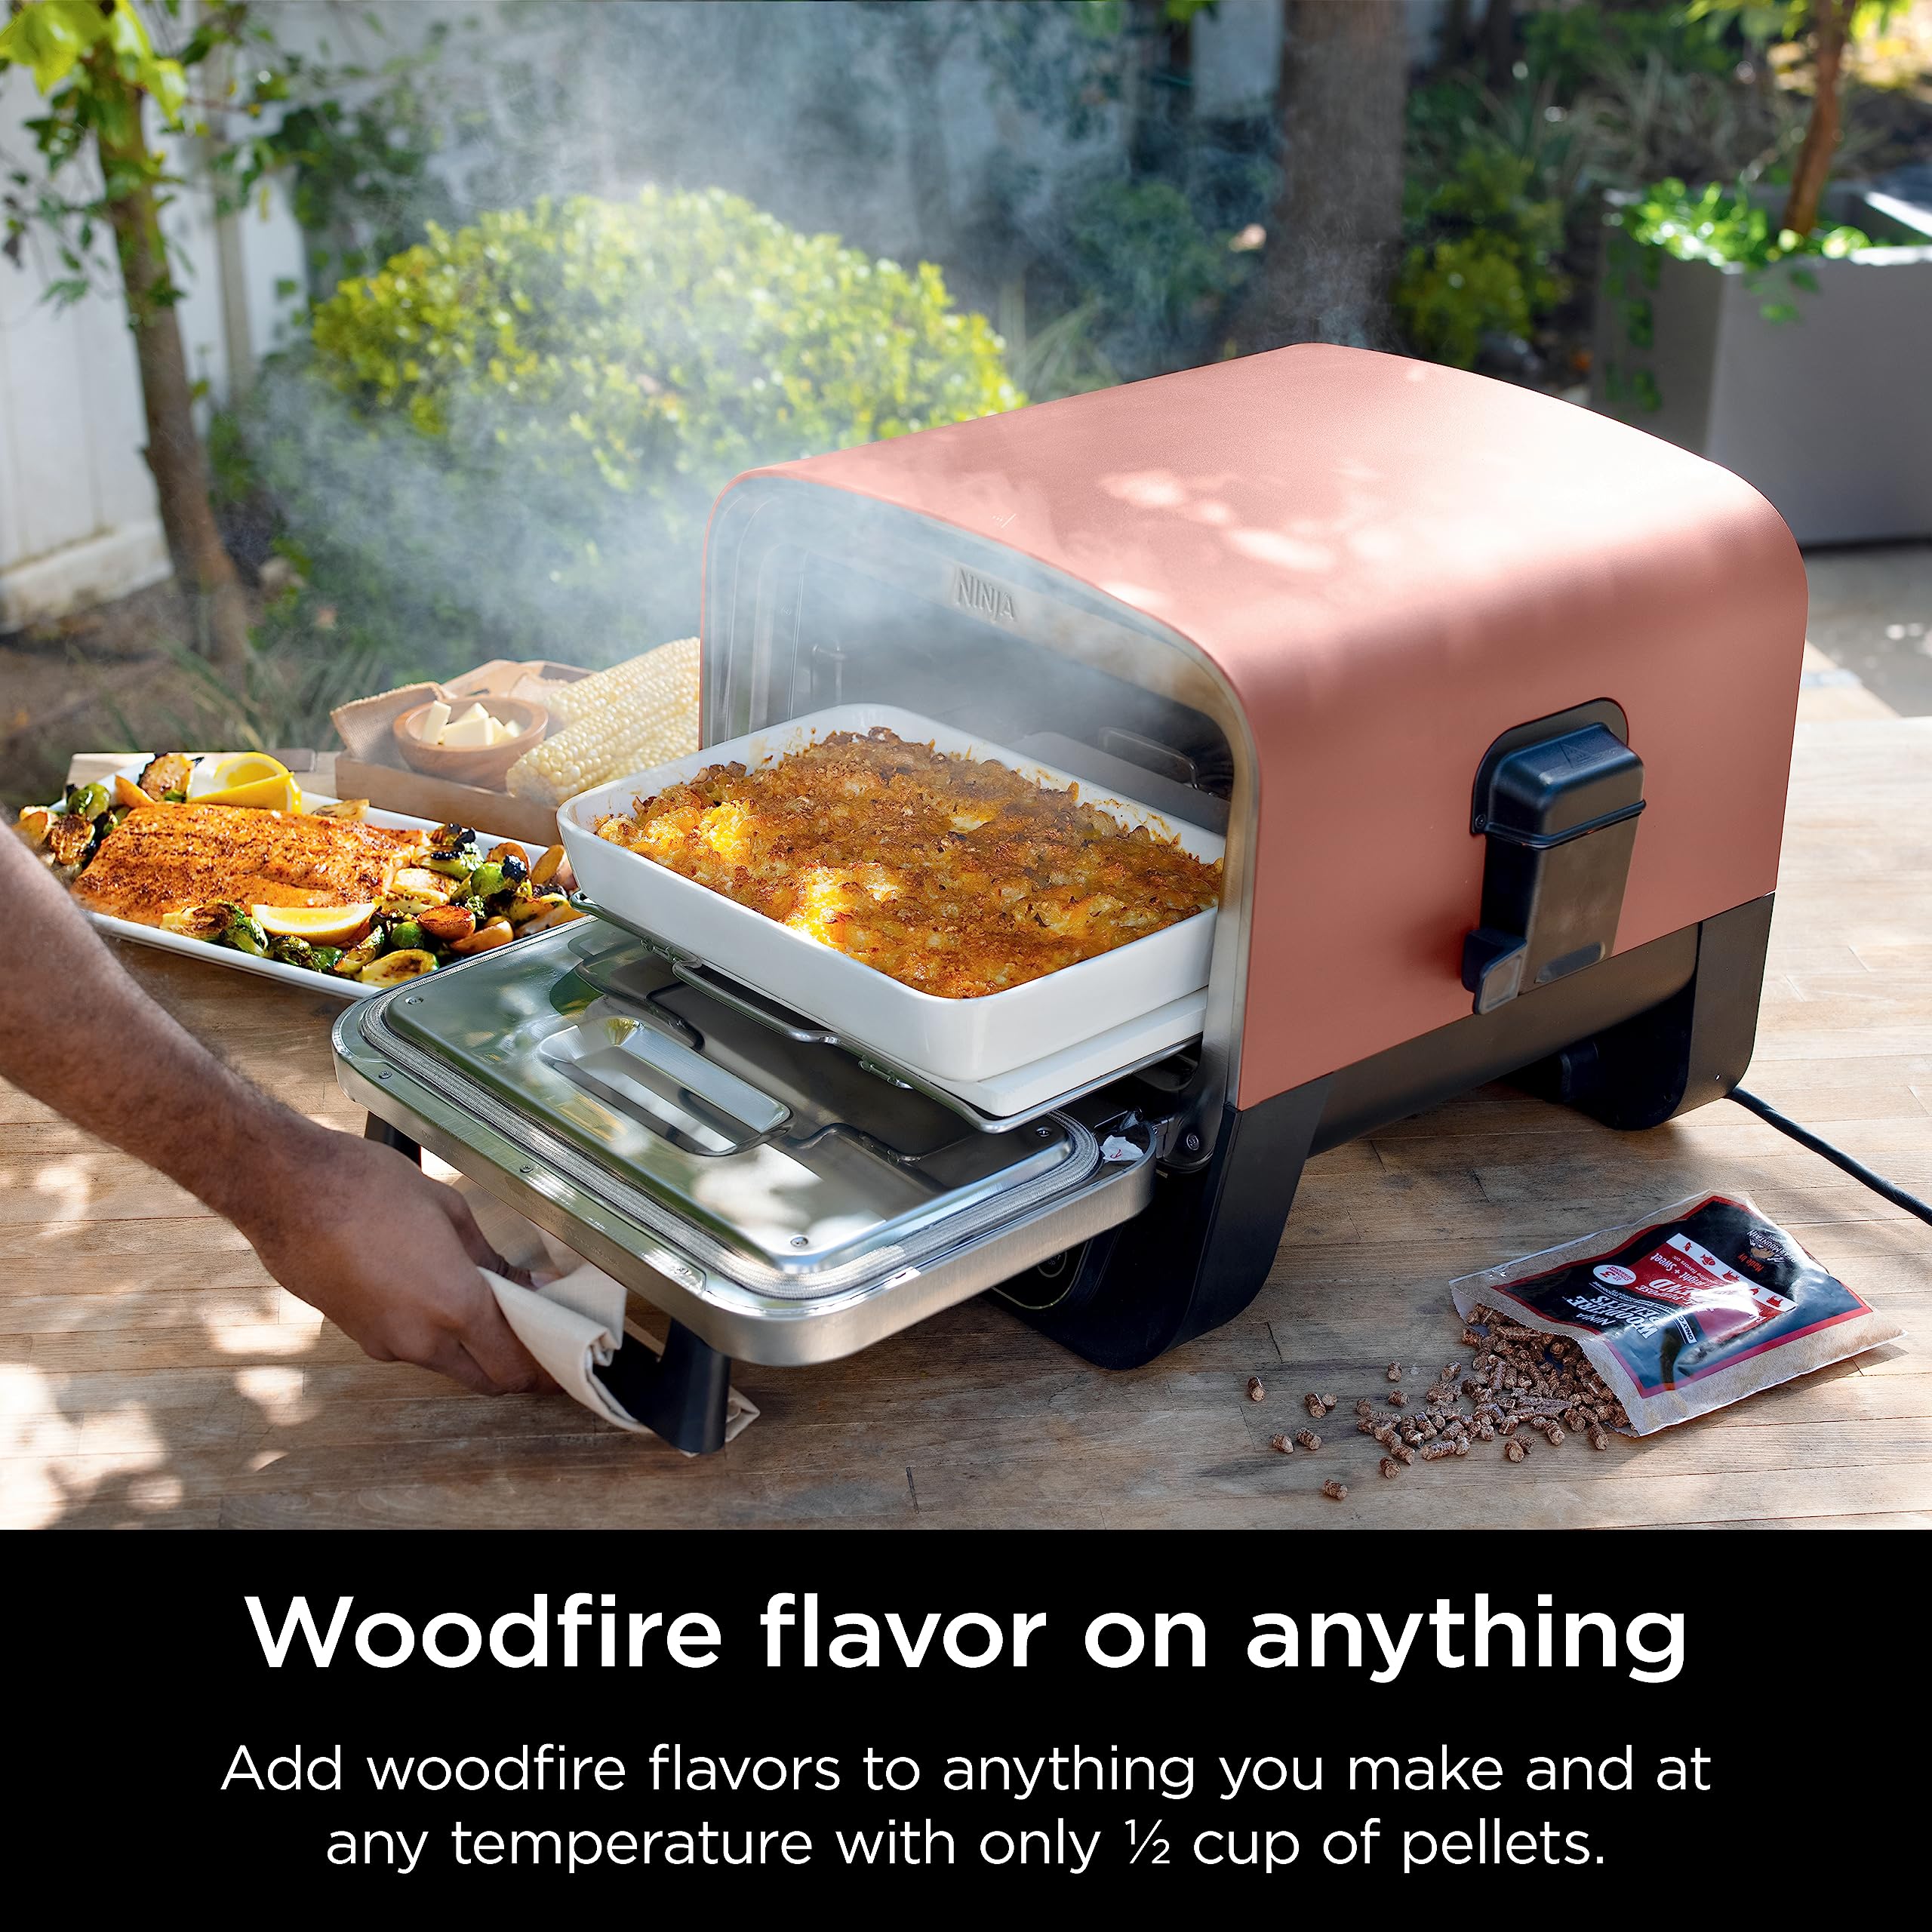 Ninja OO101 Woodfire 8-in-1 Outdoor Oven, Pizza Oven, 700°F High Heat Roaster, BBQ Smoker, Woodfire Technology, Pellets for Woodfire Flavor, Weather Resistant, Portable, Electric, Terracotta Red